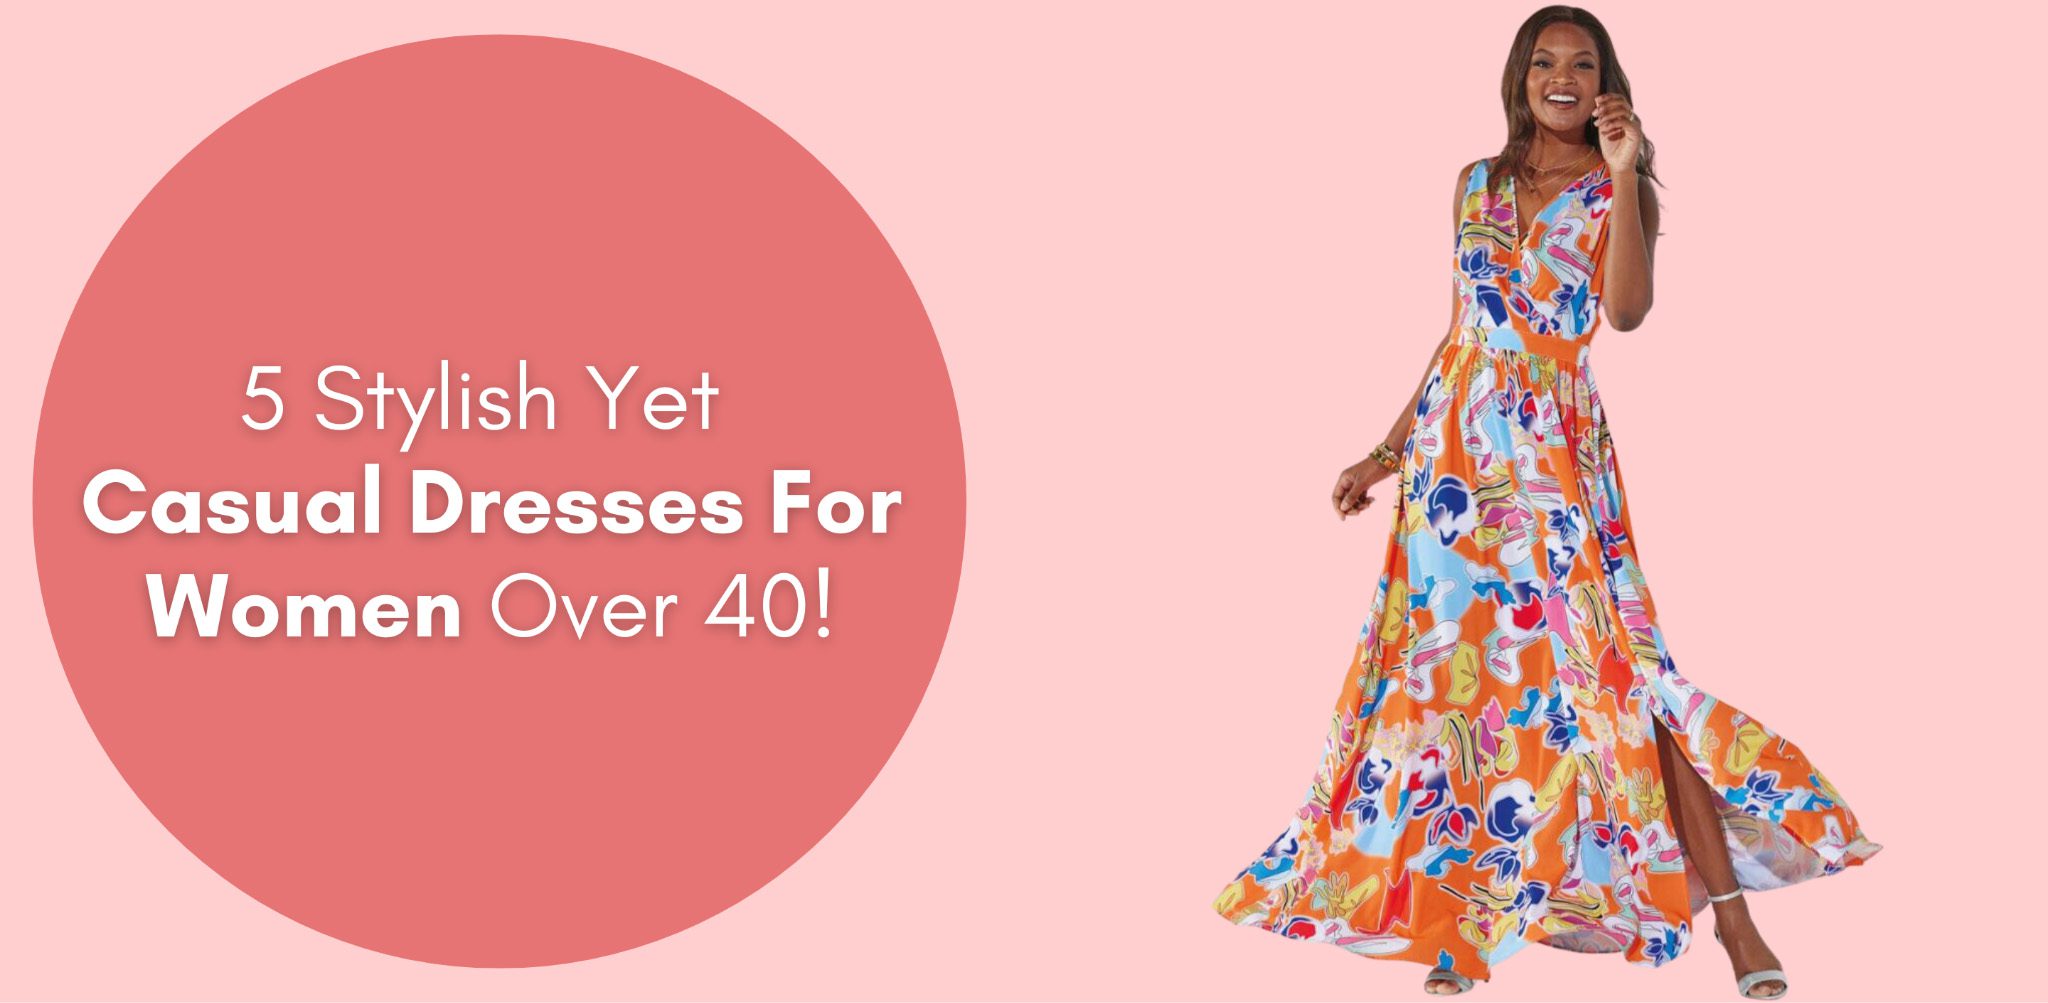 5 stylish yet casual dresses for women over 40